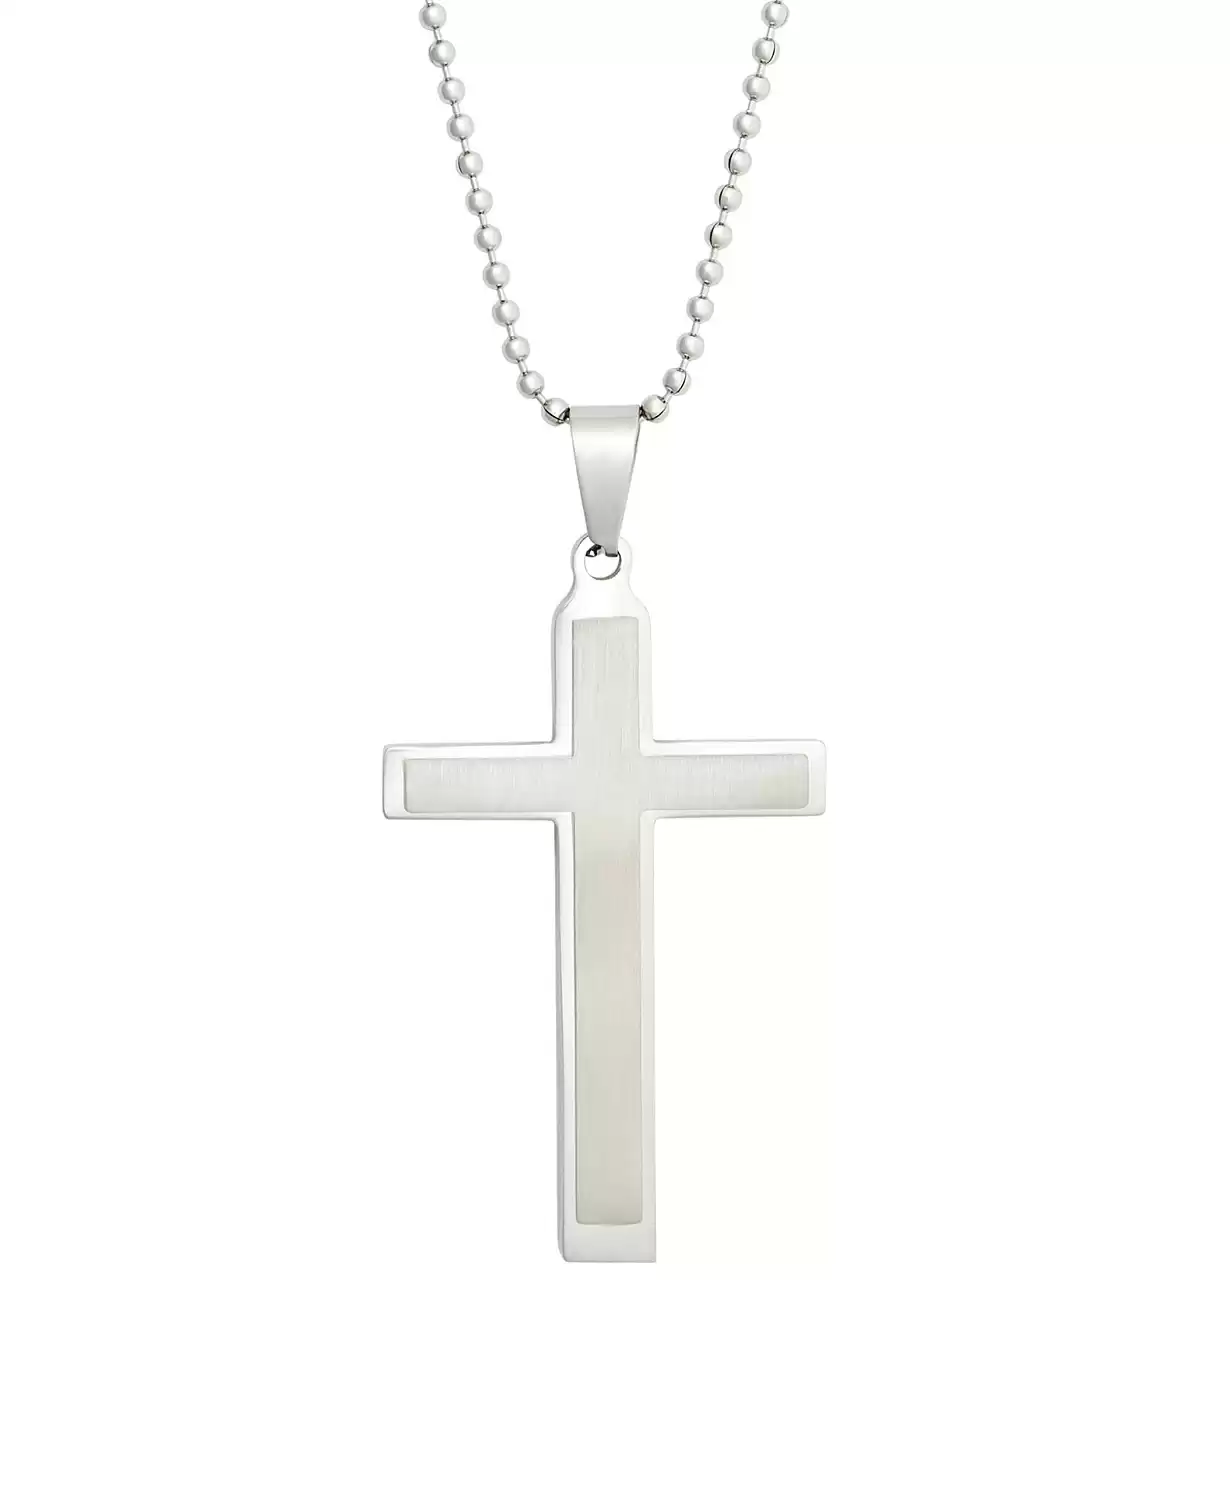 Eve’s Jewelry Men's Brushed Stainless Steel Cross Pendant Necklace